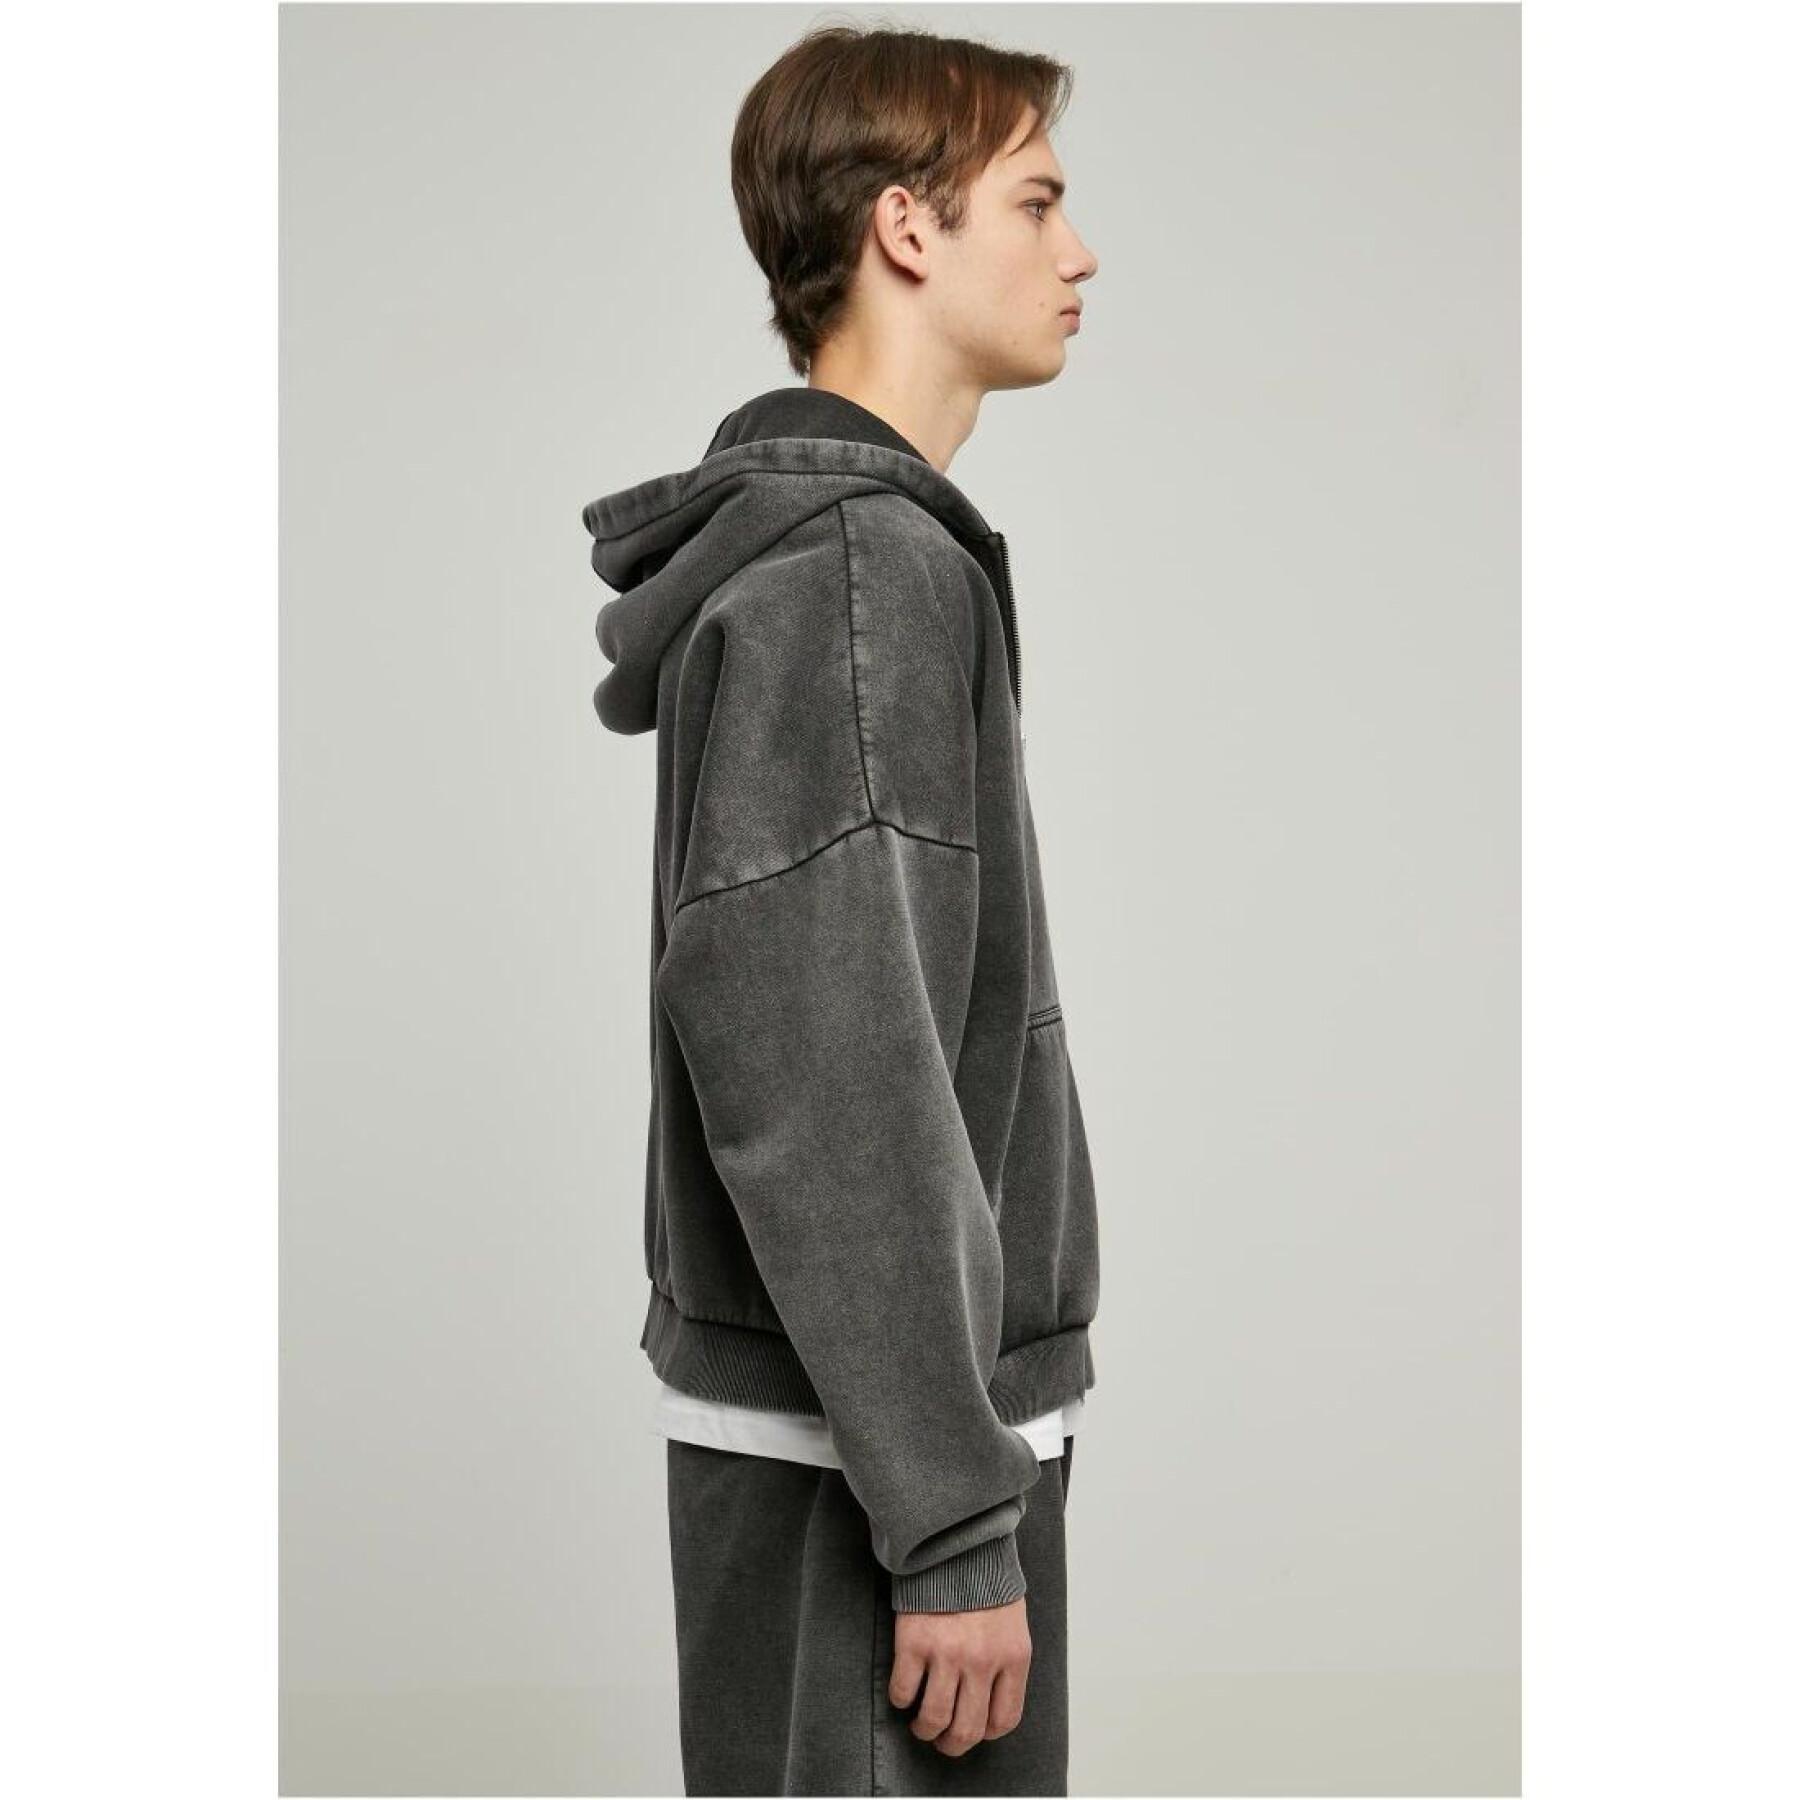 Zip-up hoodie Urban Classics 90's Heavy Sand Washed